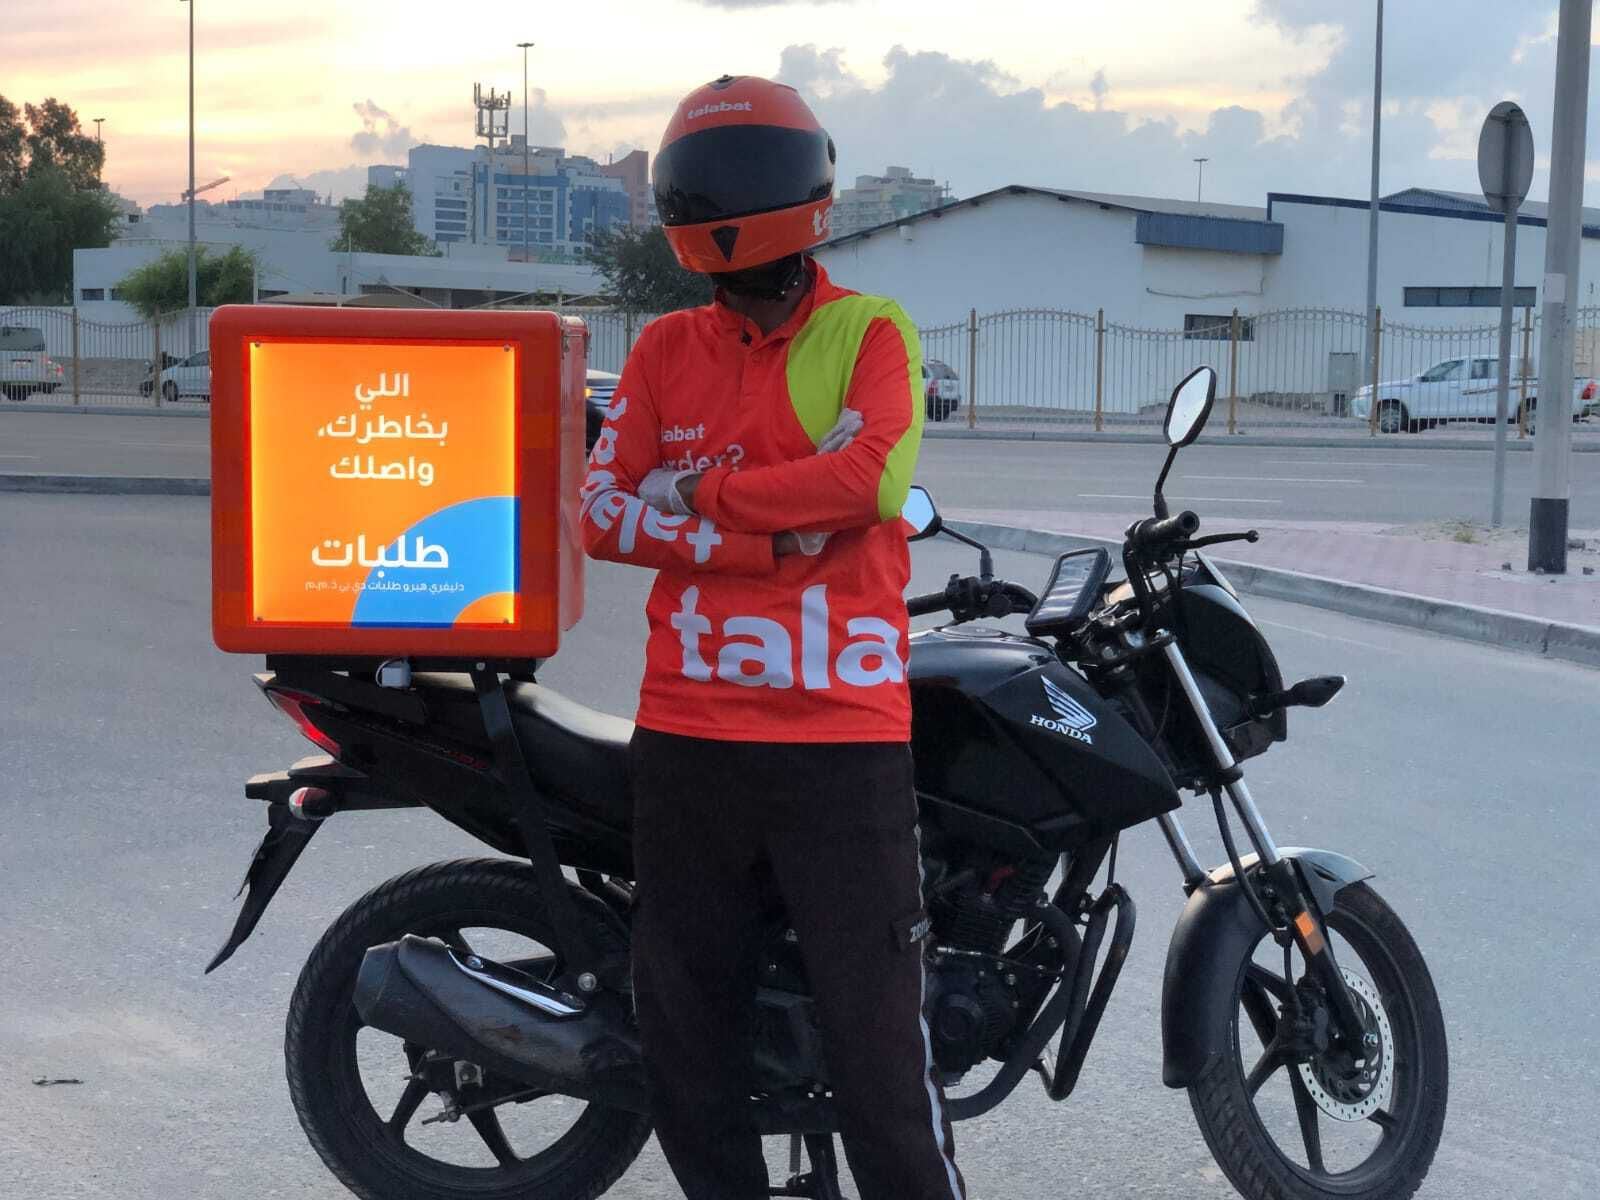 Food delivery service Talabat to expand UAE operations